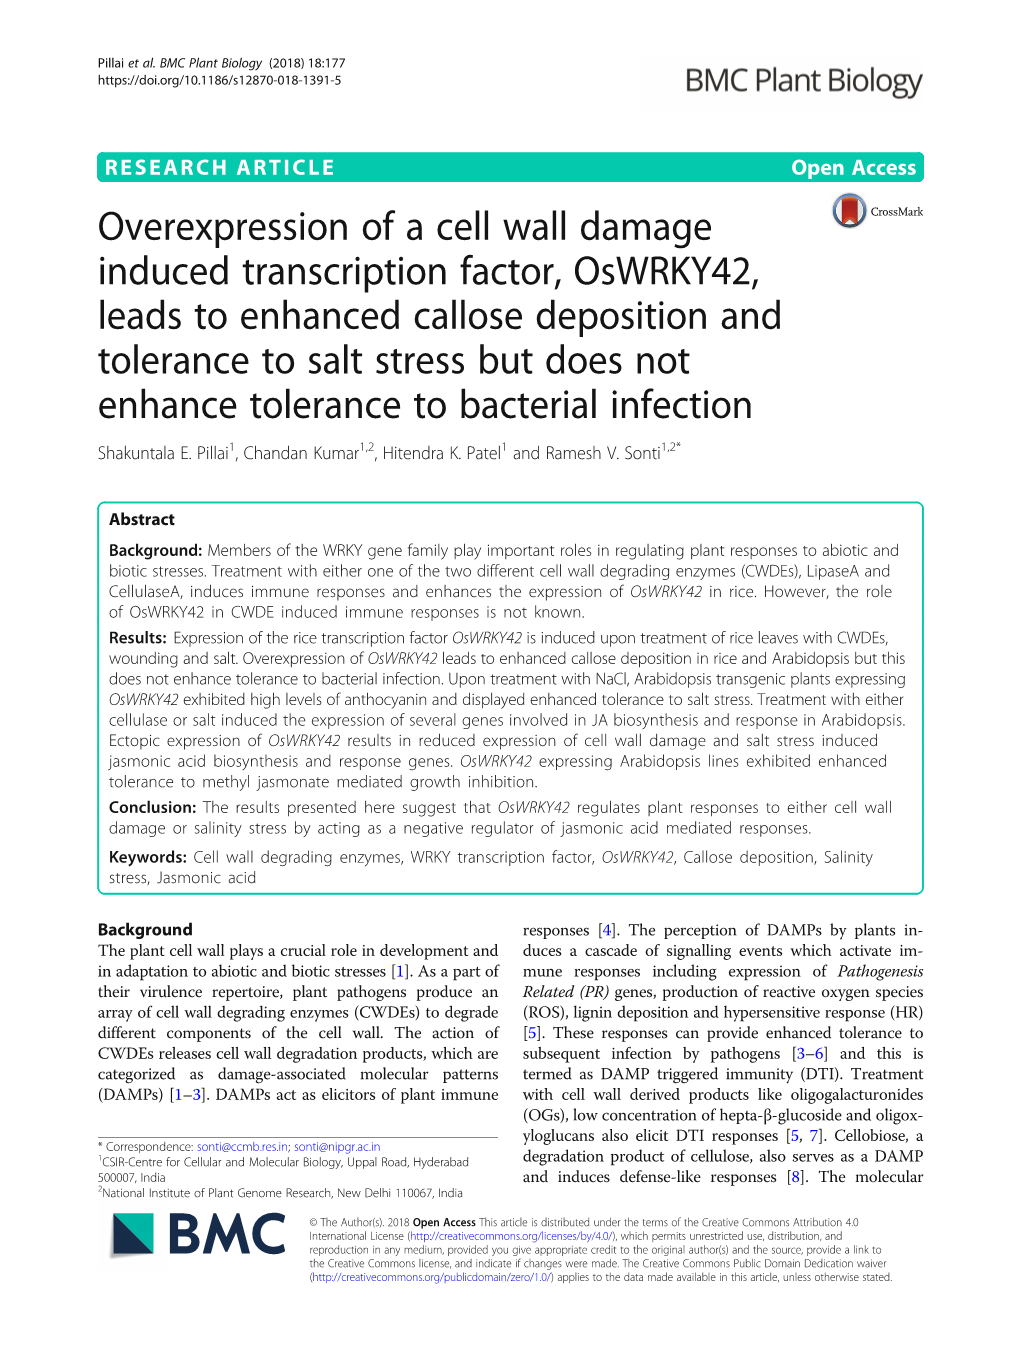 Overexpression of a Cell Wall Damage Induced Transcription Factor